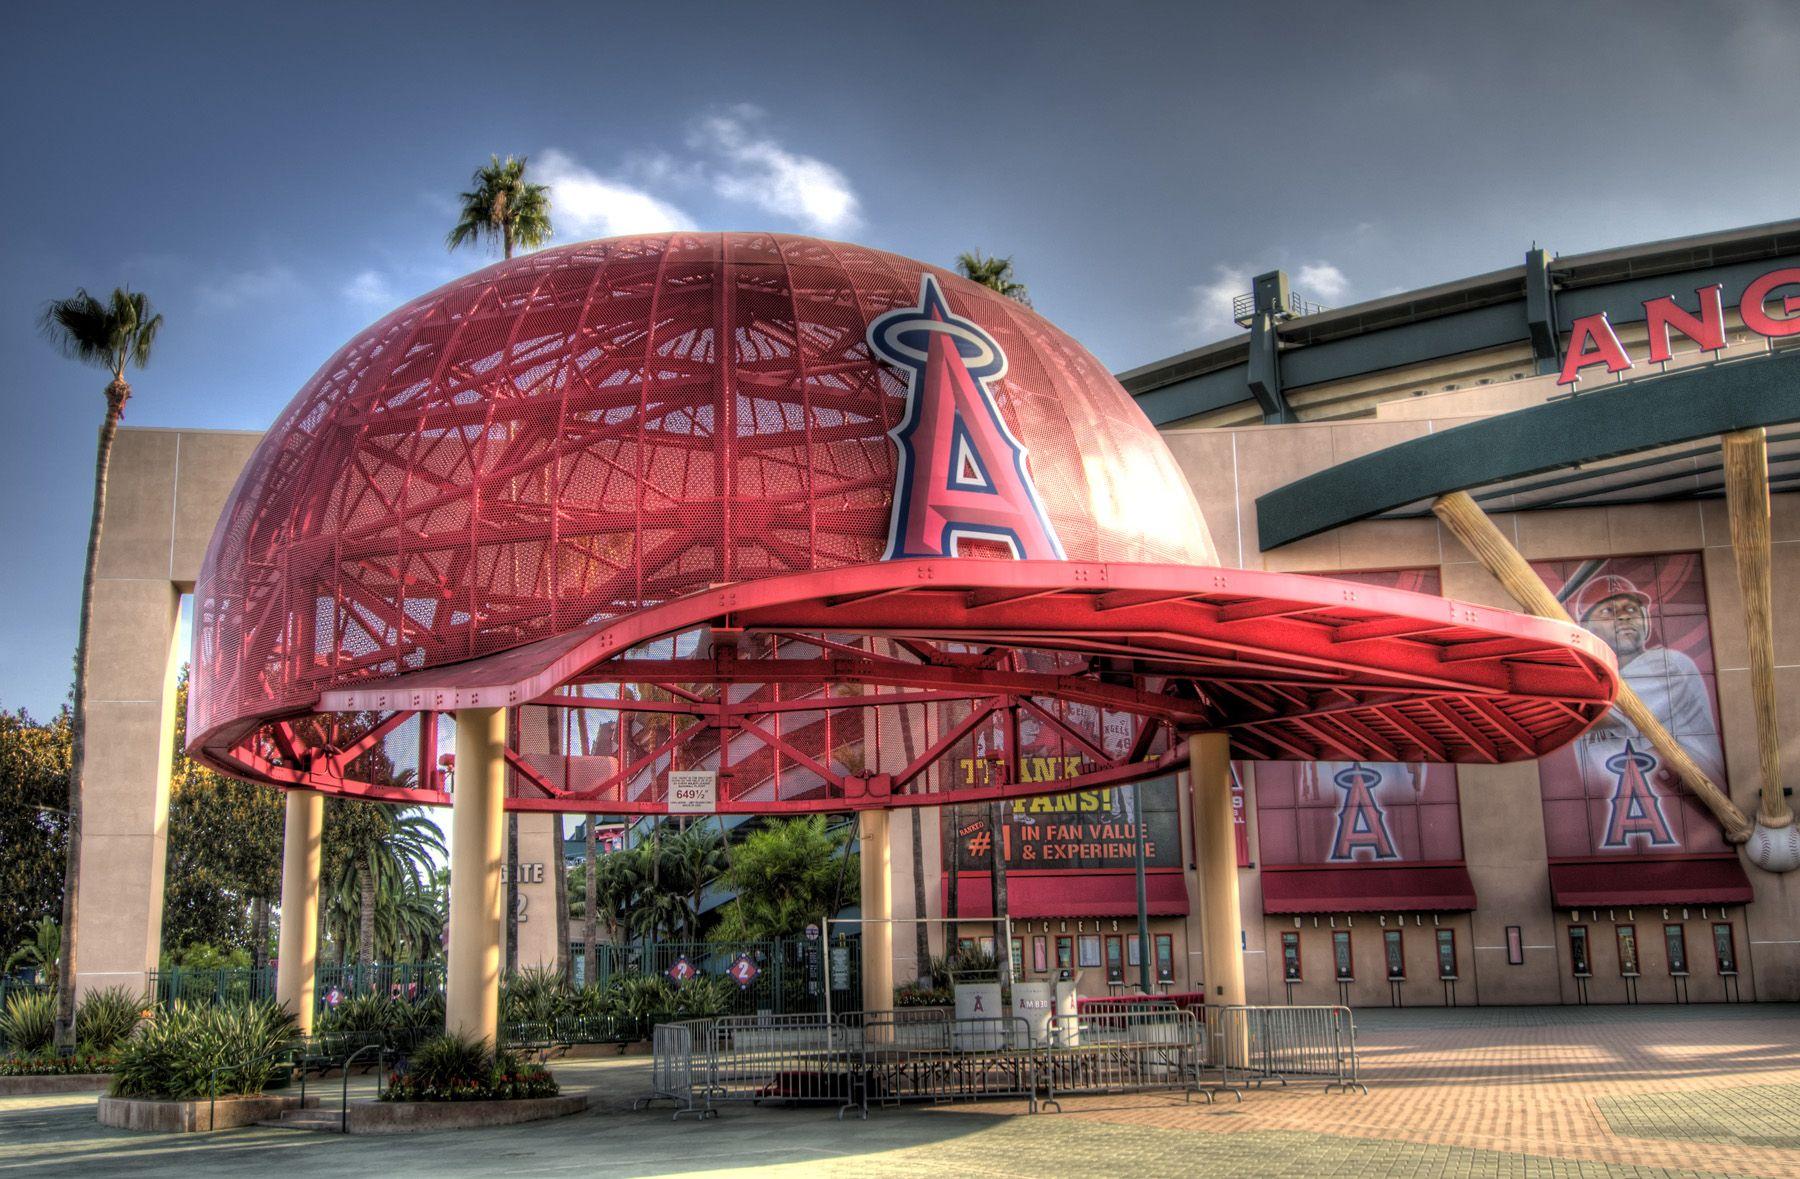 La Angels Wallpaper For Android Gadget and PC Wallpaper